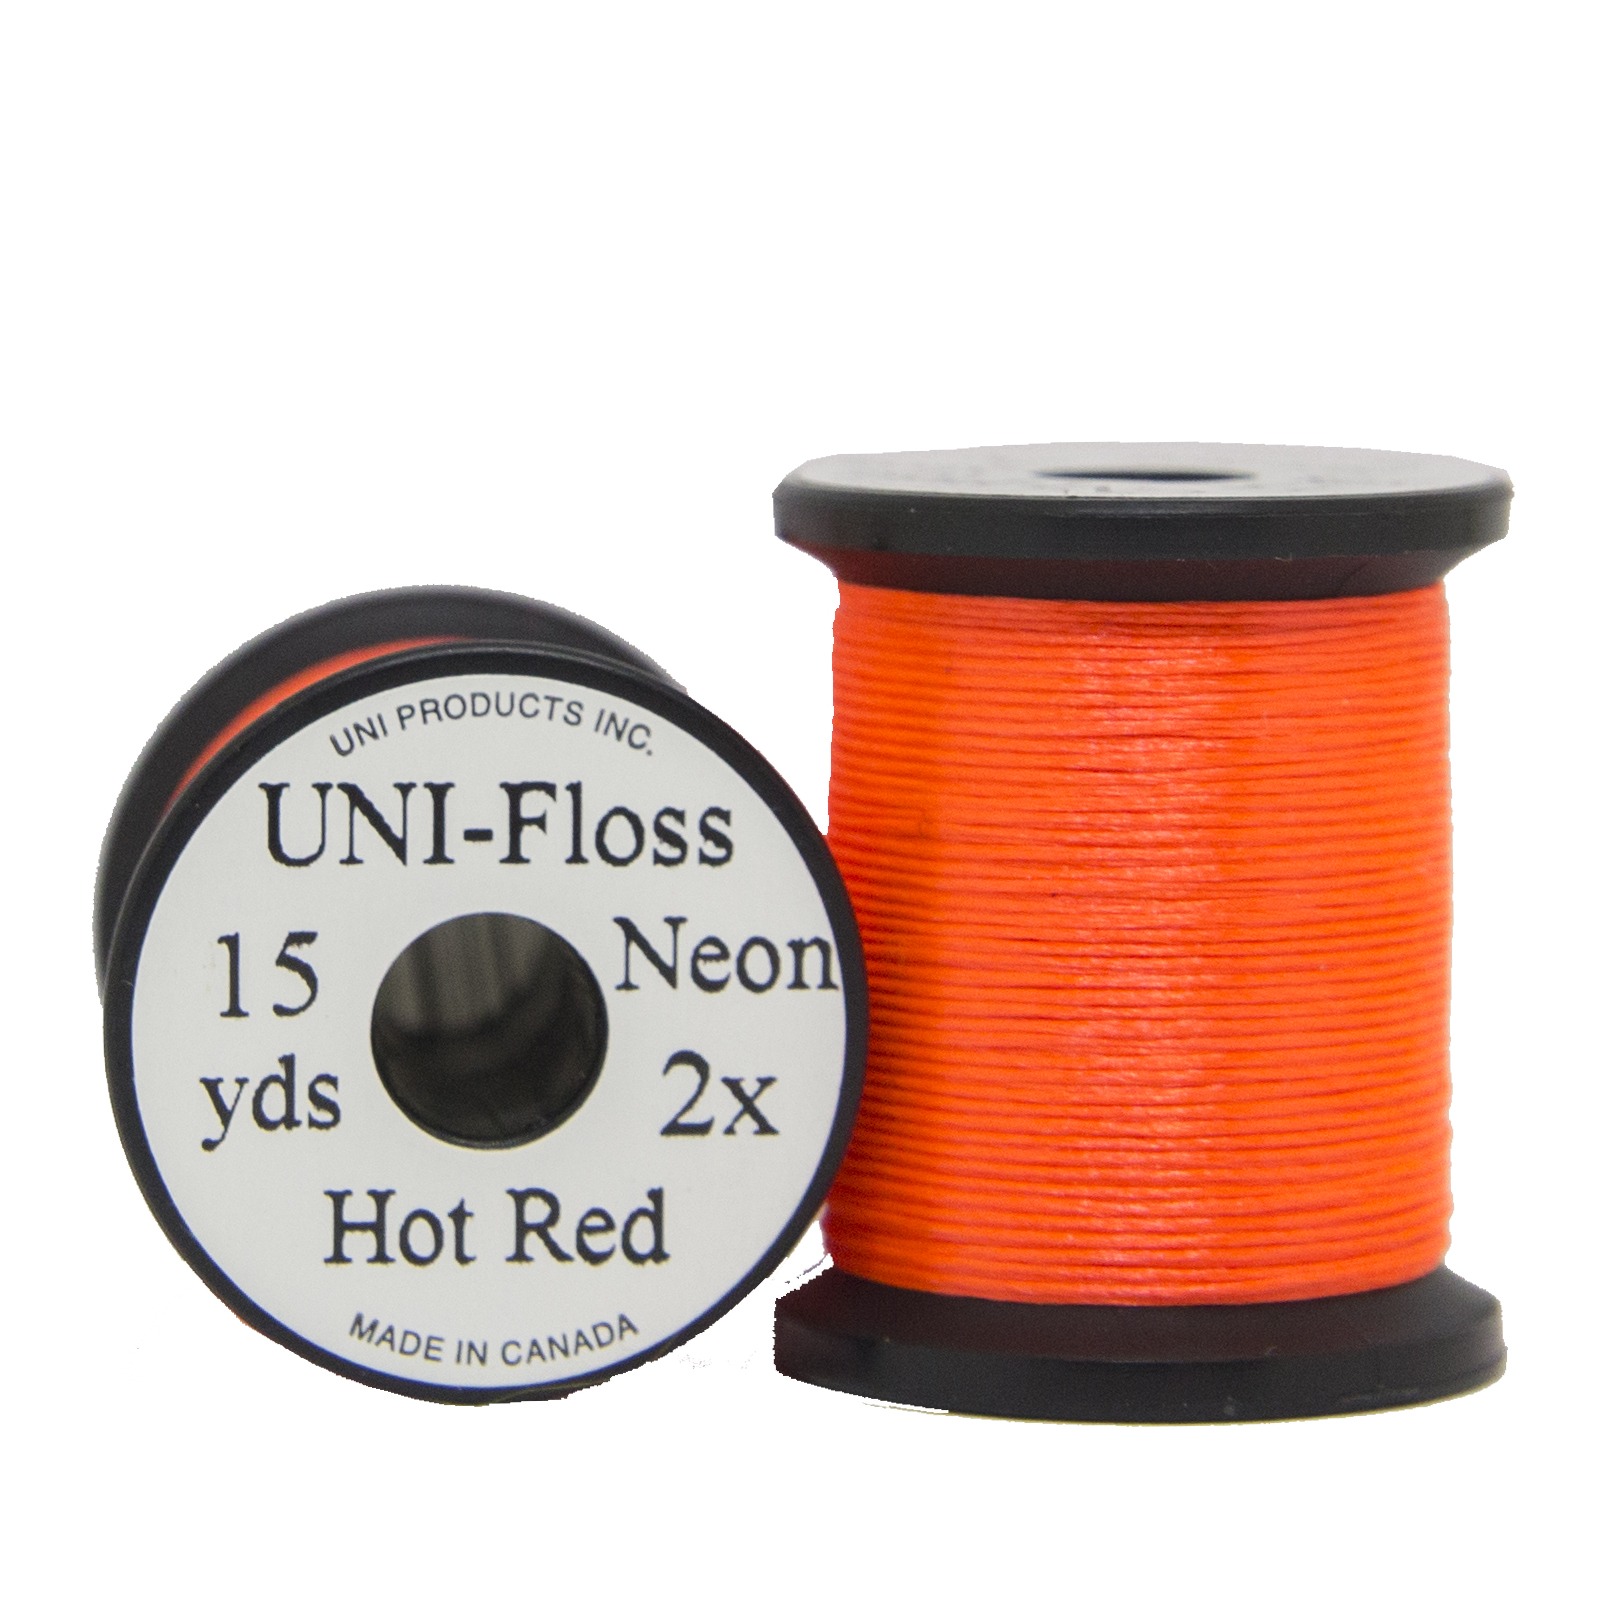 UNI Floss Polyester Neon - Hot Red